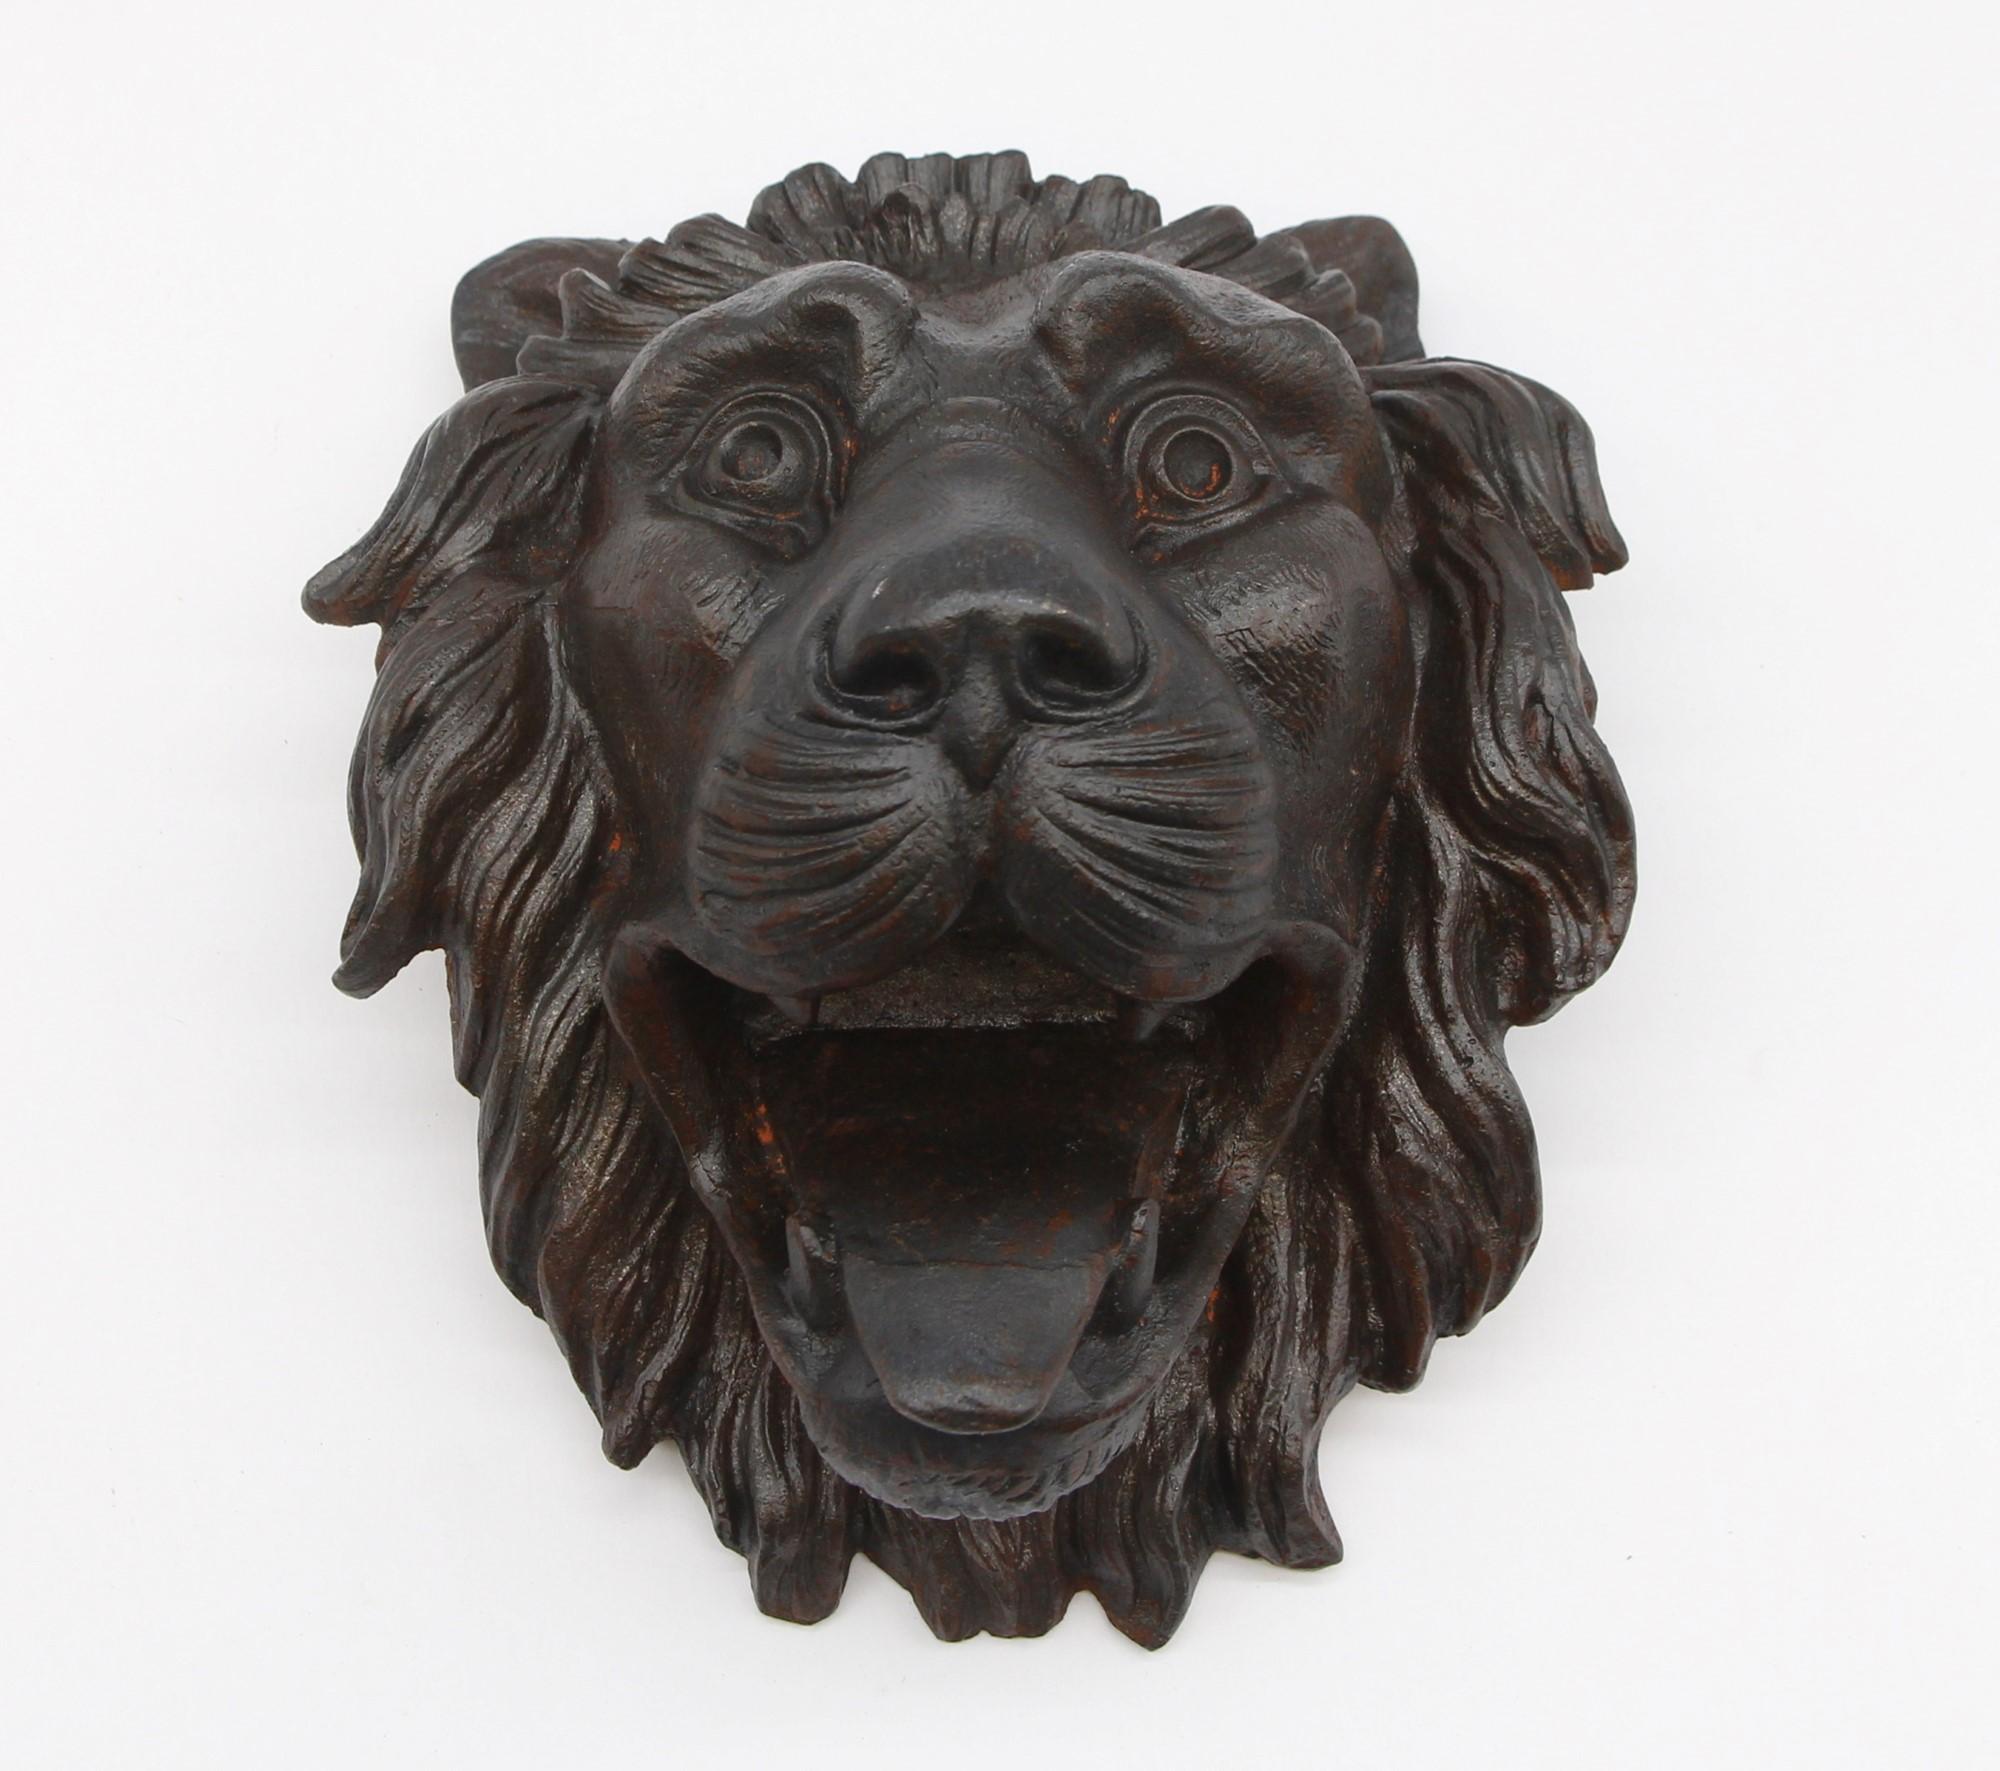 Late 1800s heavy solid cast iron lion head with ornate detail. Slightly concave side profile. Please note, this item is located in one of our NYC locations.